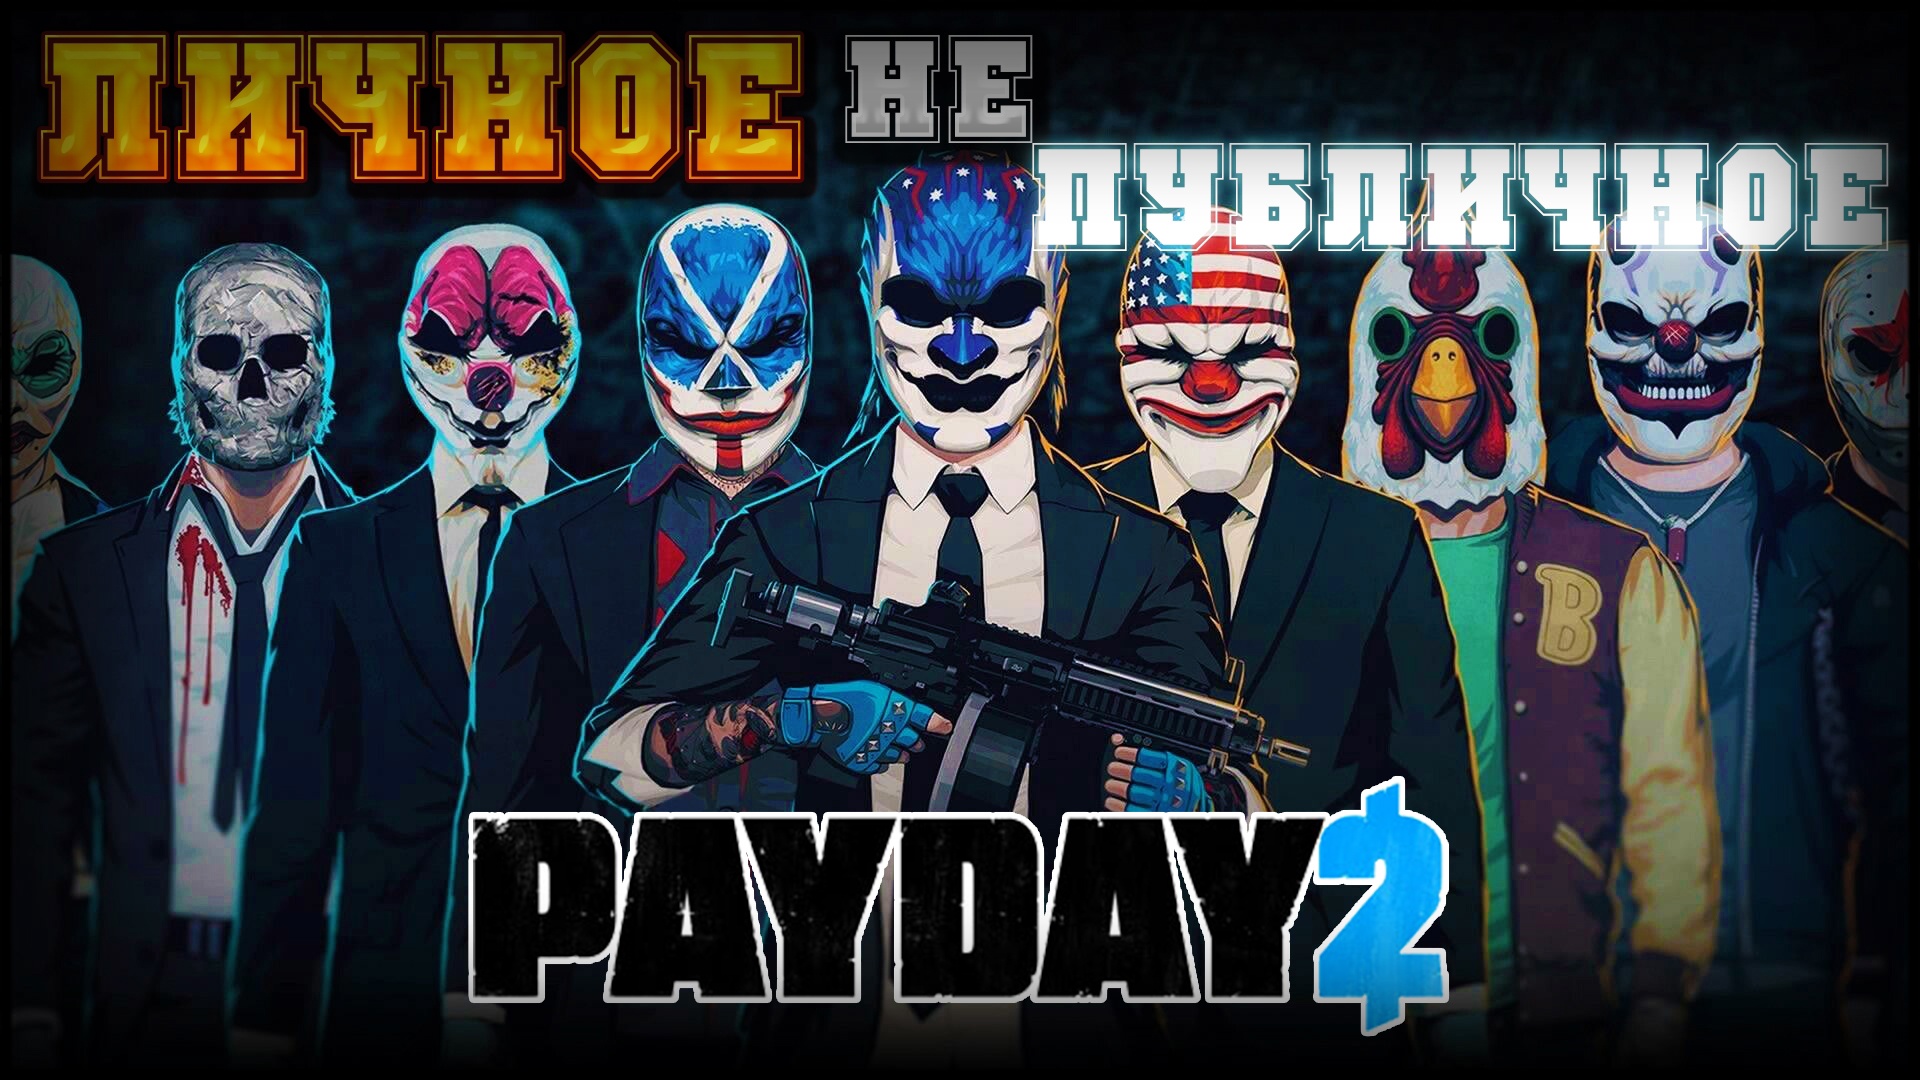 Bank go payday 2 фото 40